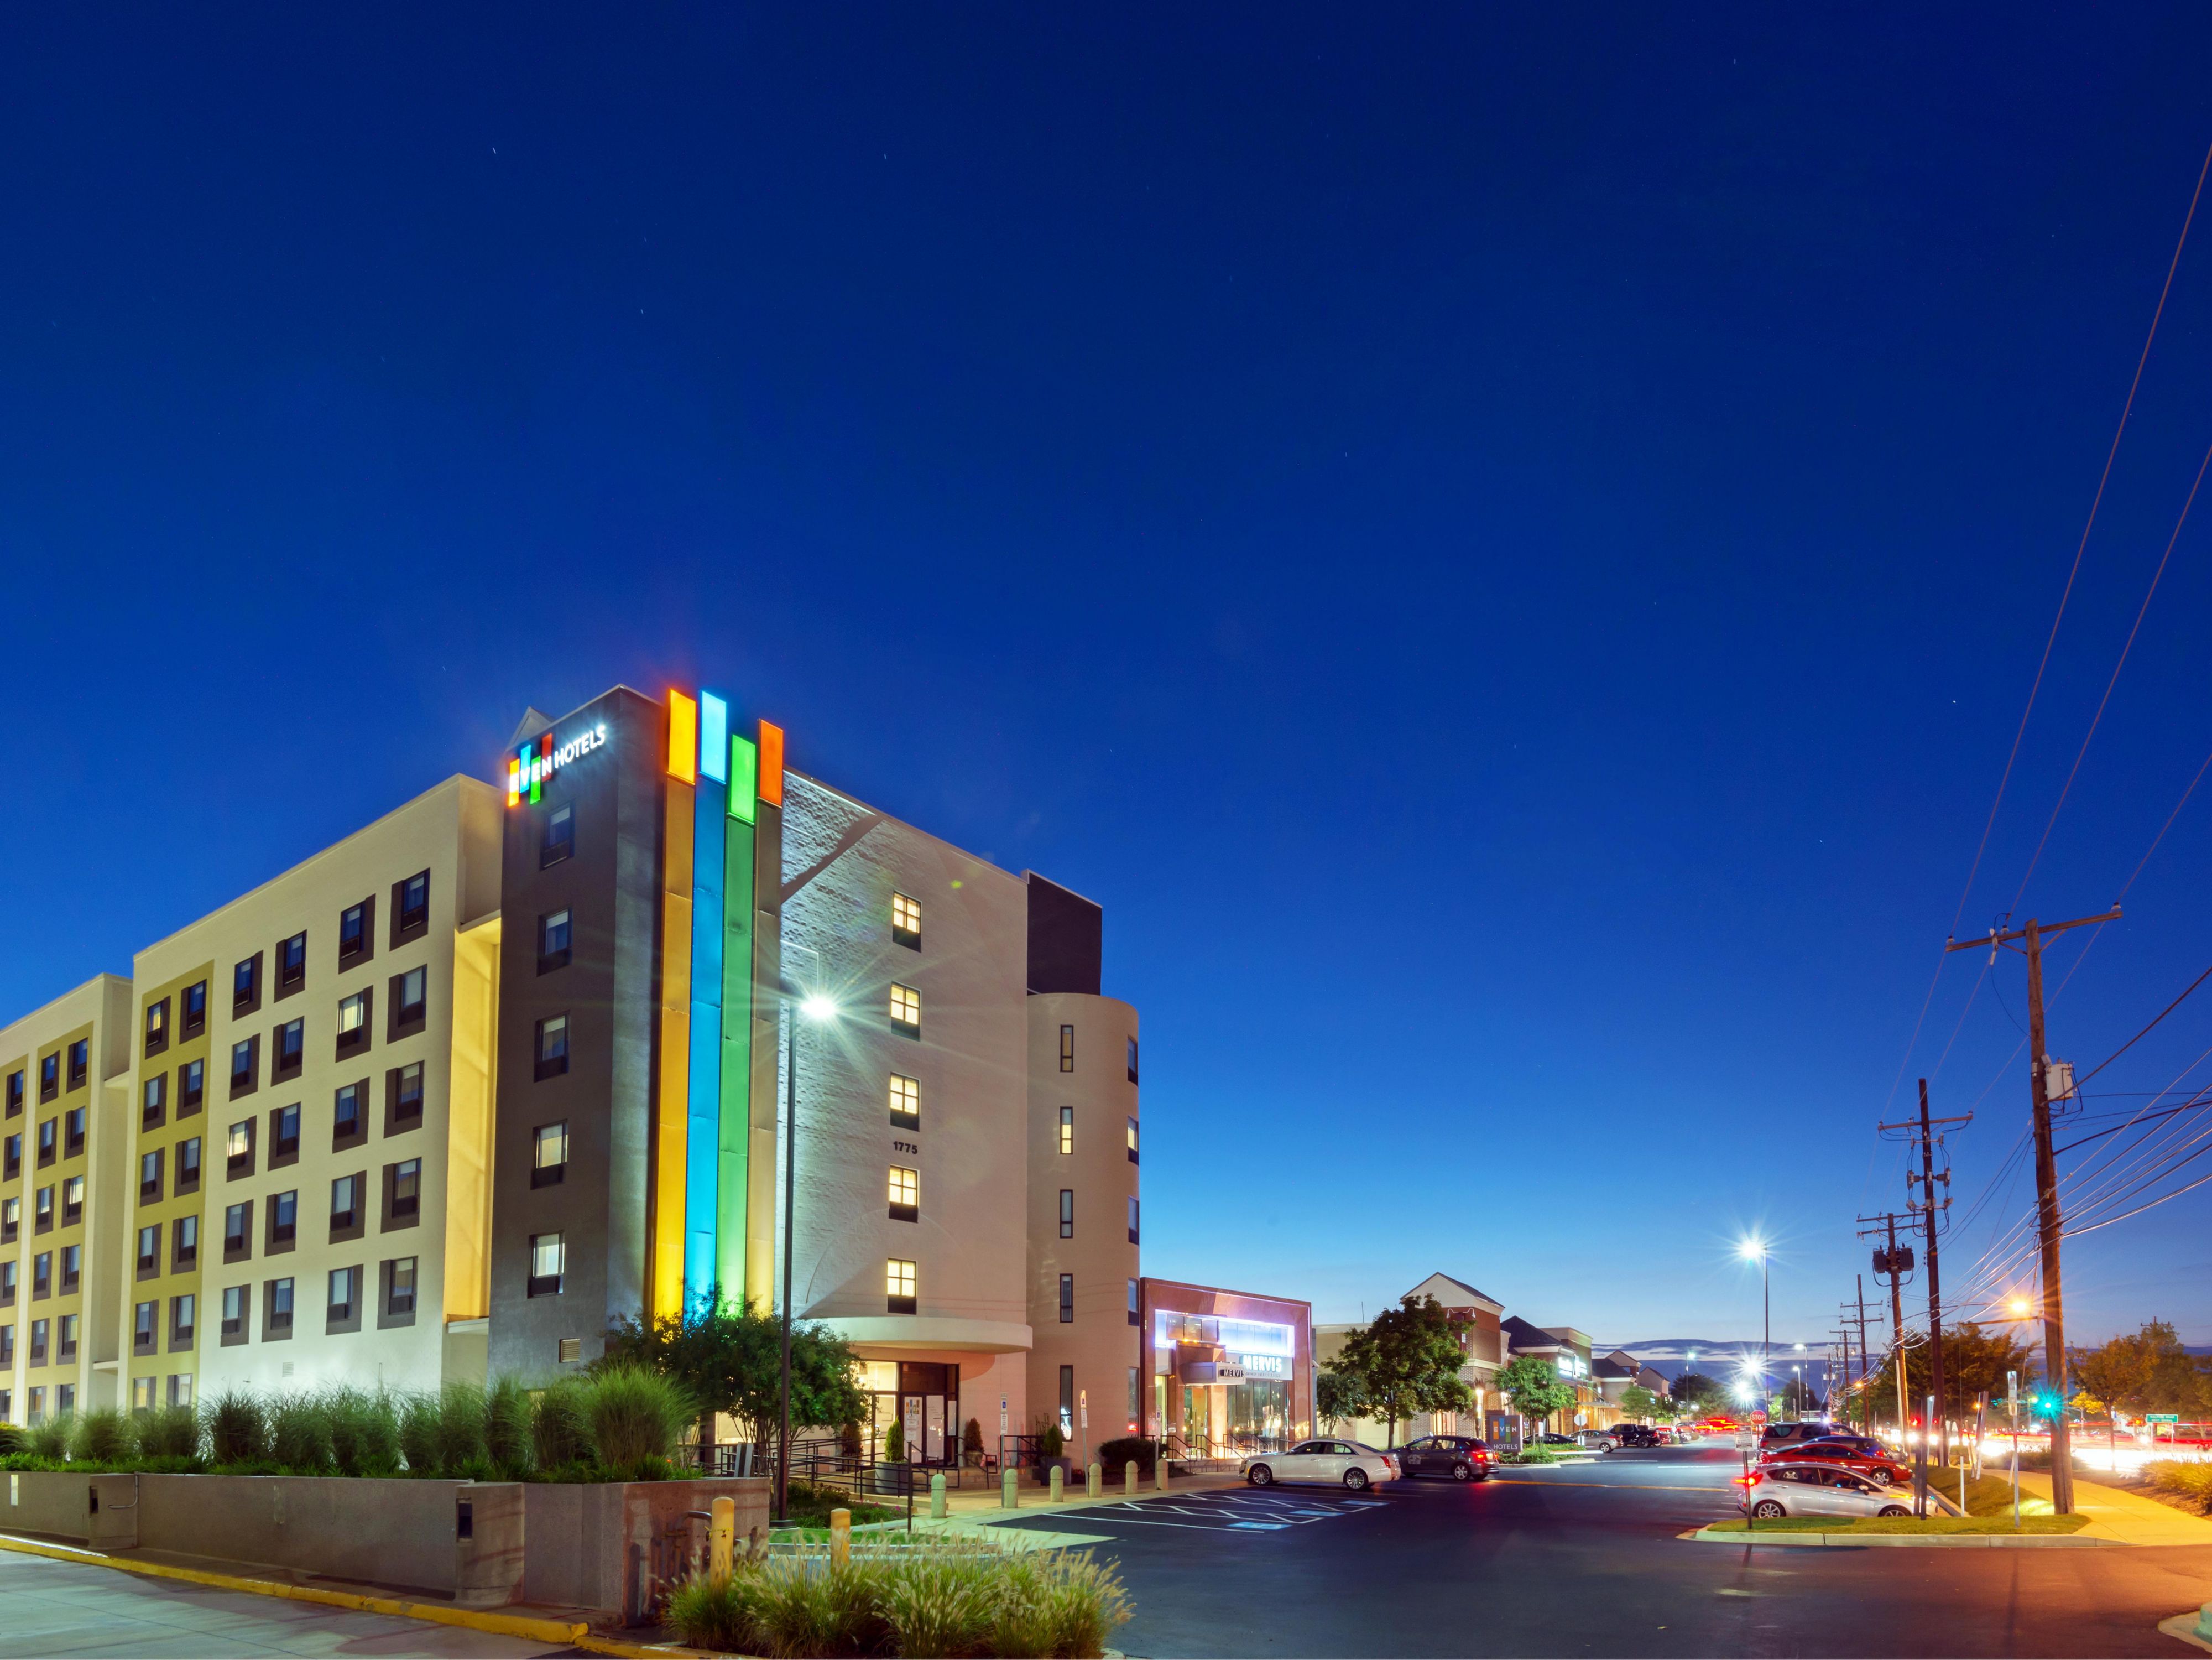 Close to Baltimore, Bethesda, Gaithersburg, and Washington D.C., take full advantage of our pet-friendly hotel's central location. You can access the Twinbrook Metro Station, located across the street, for easy transport to events, entertainment, landmarks, and business offices. Our hotel also provides a direct shuttle service to the station.
